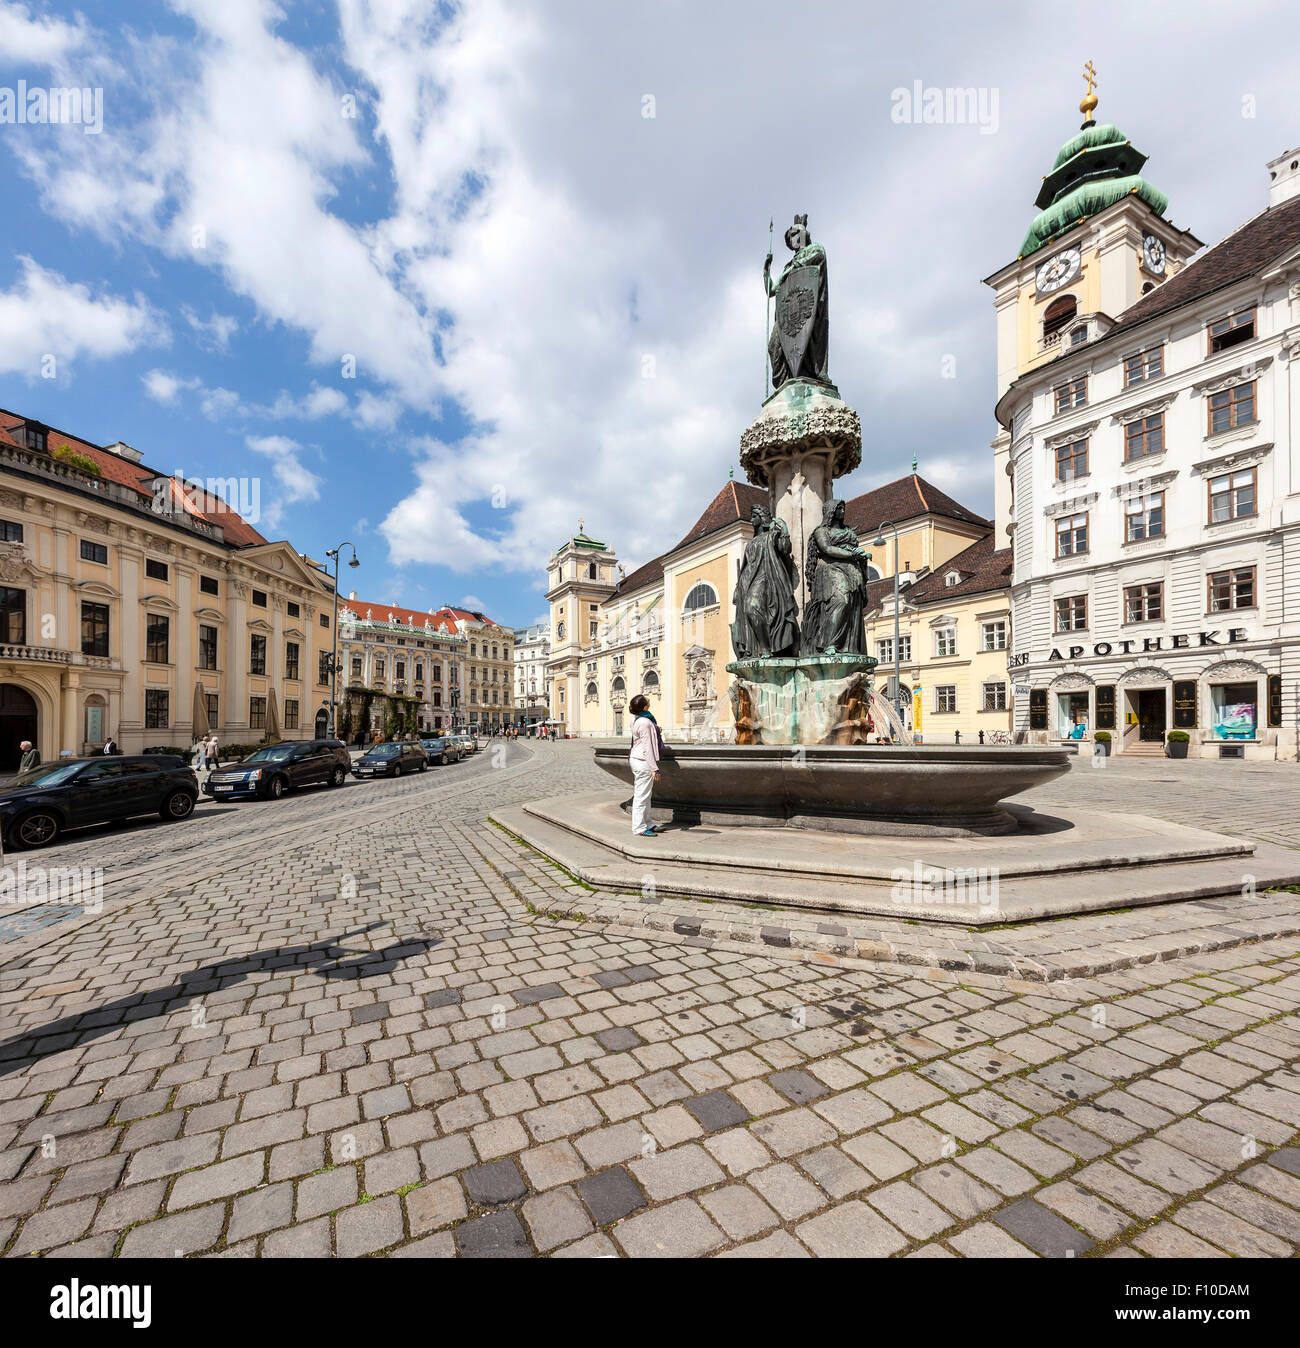 Austriabrunnen in front of the Scottish Abbey on the square Freyung in the center of Vienna Stock Photo